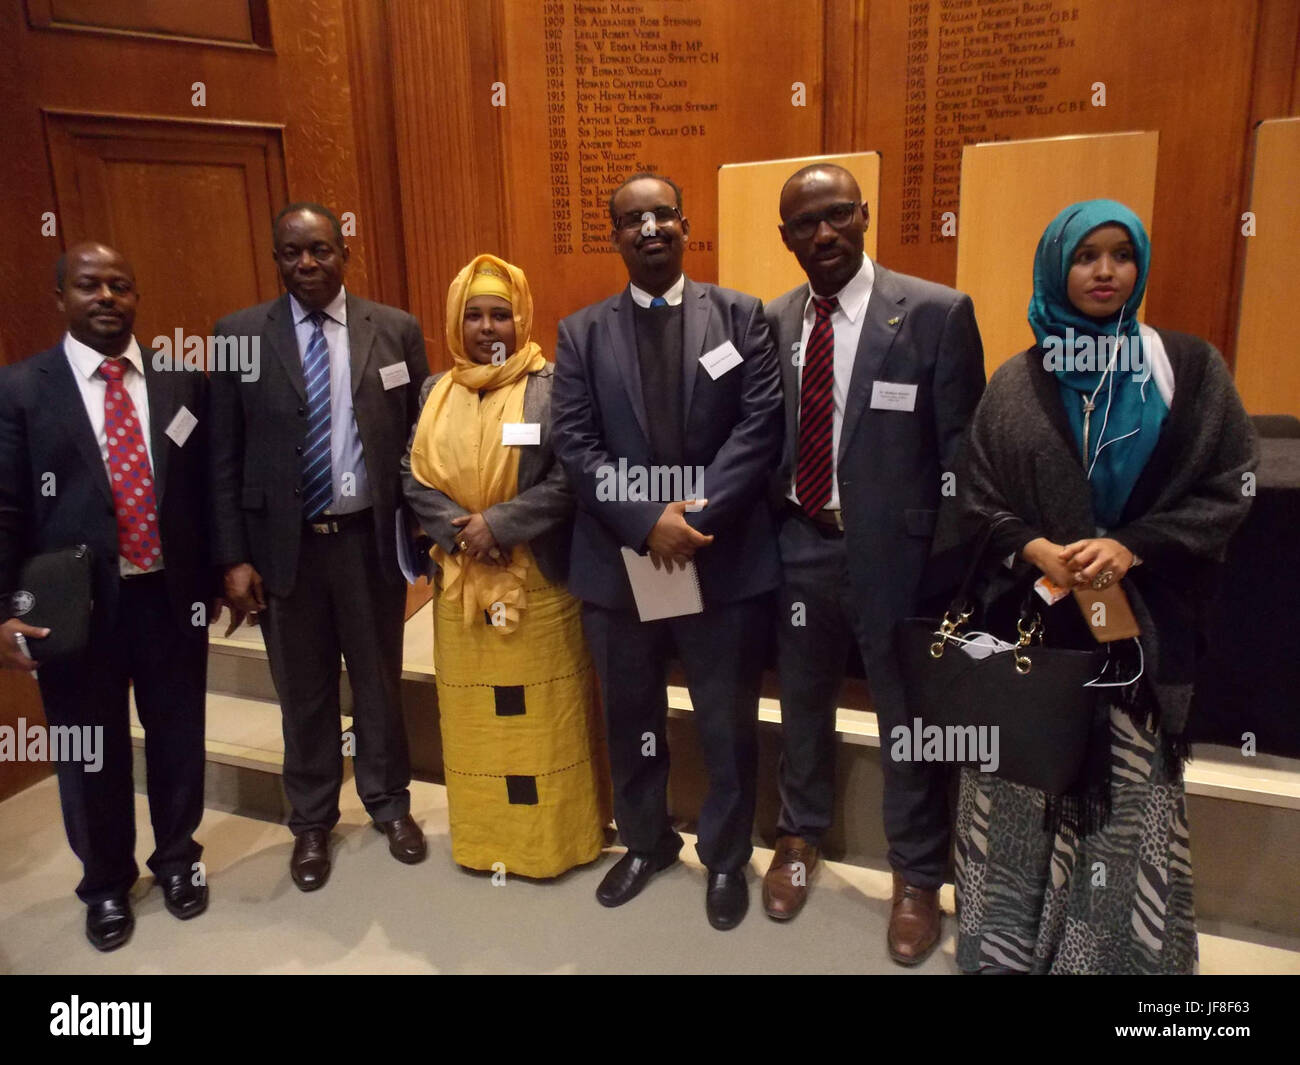 Ambassador Francisco Madeira, the Special Representative of the Chairperson of the African Union Commission (SRCC) for Somalia in a group photo with senior officials of the African Union Mission in Somalia (AMISOM) and members of the Somali community in London. This was during a public engagement with the Diaspora Somali community on May 12, 2017. AMISOM Photo Stock Photo